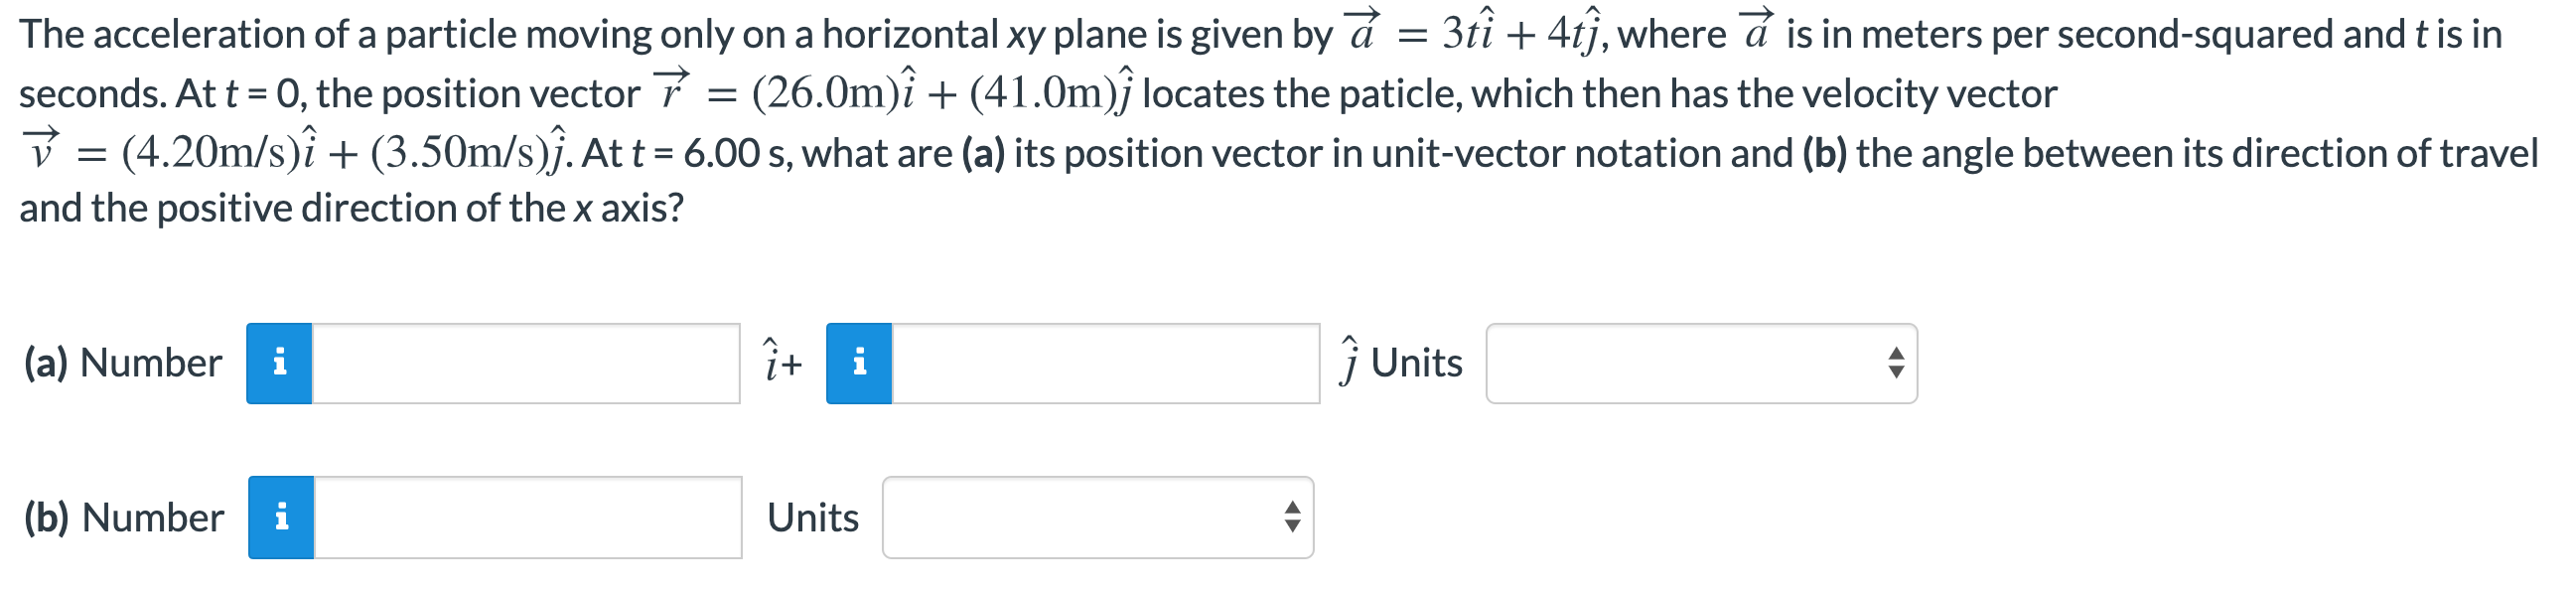 The acceleration of a particle moving only on a horizontal xy plane is given by Ã¡ = 3ti + 4tj, where Ã¡ is in meters per secon